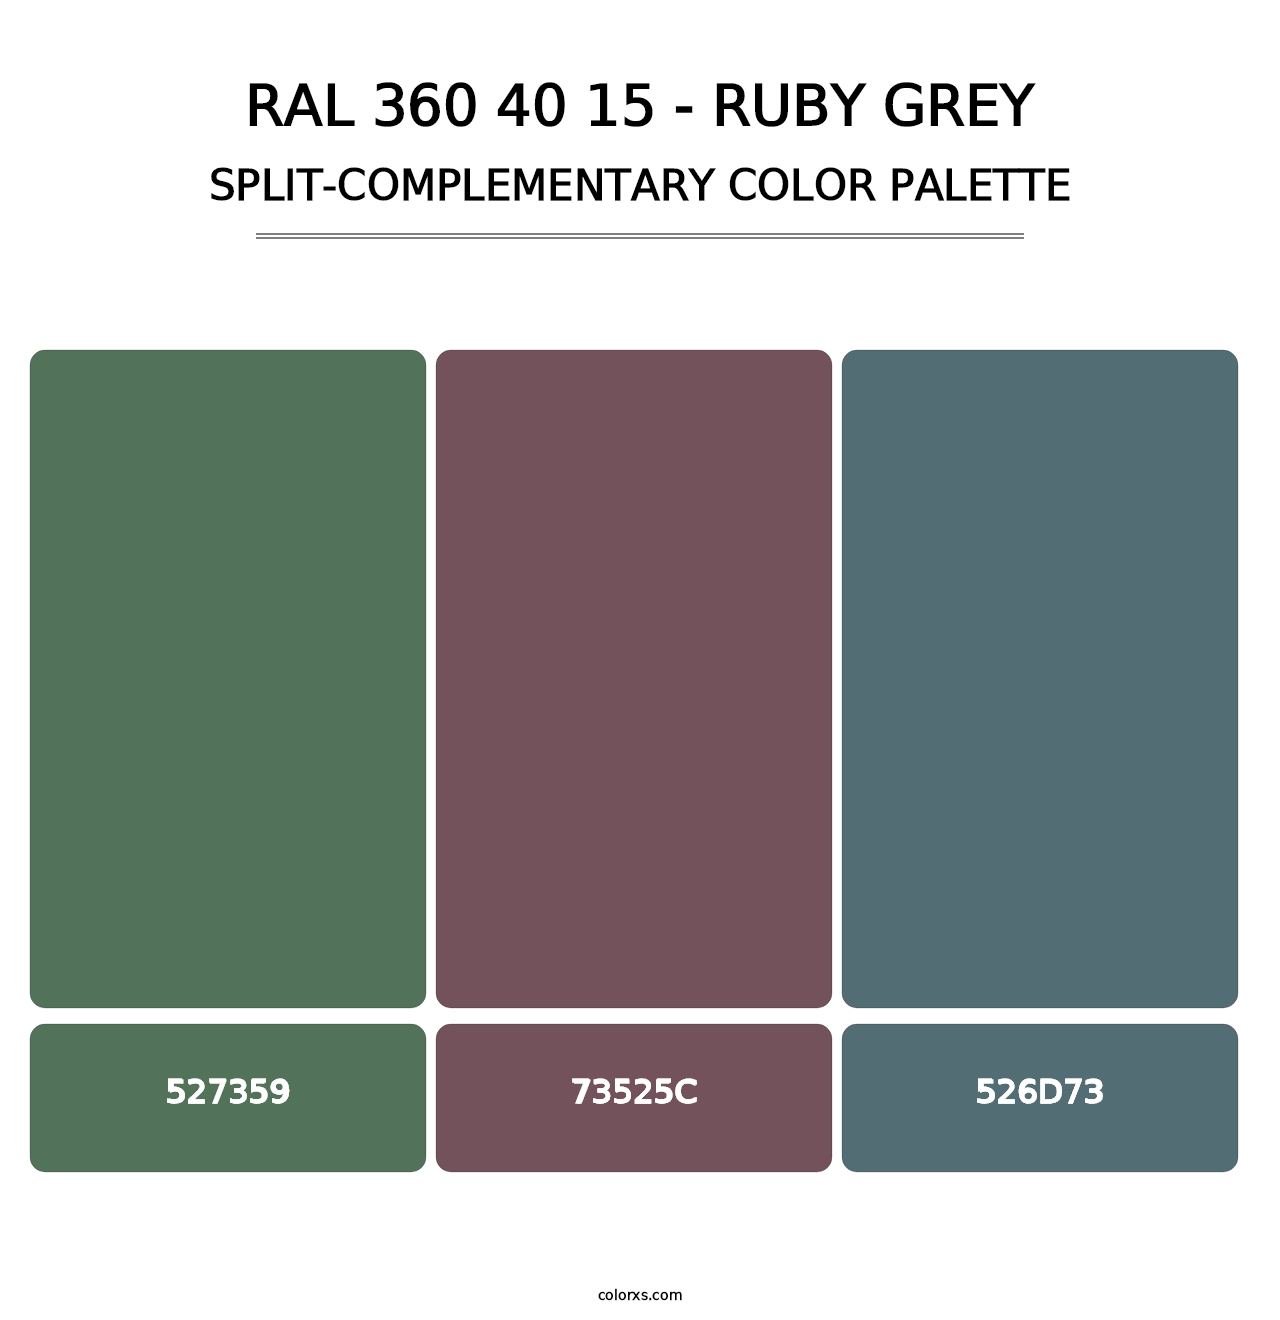 RAL 360 40 15 - Ruby Grey - Split-Complementary Color Palette